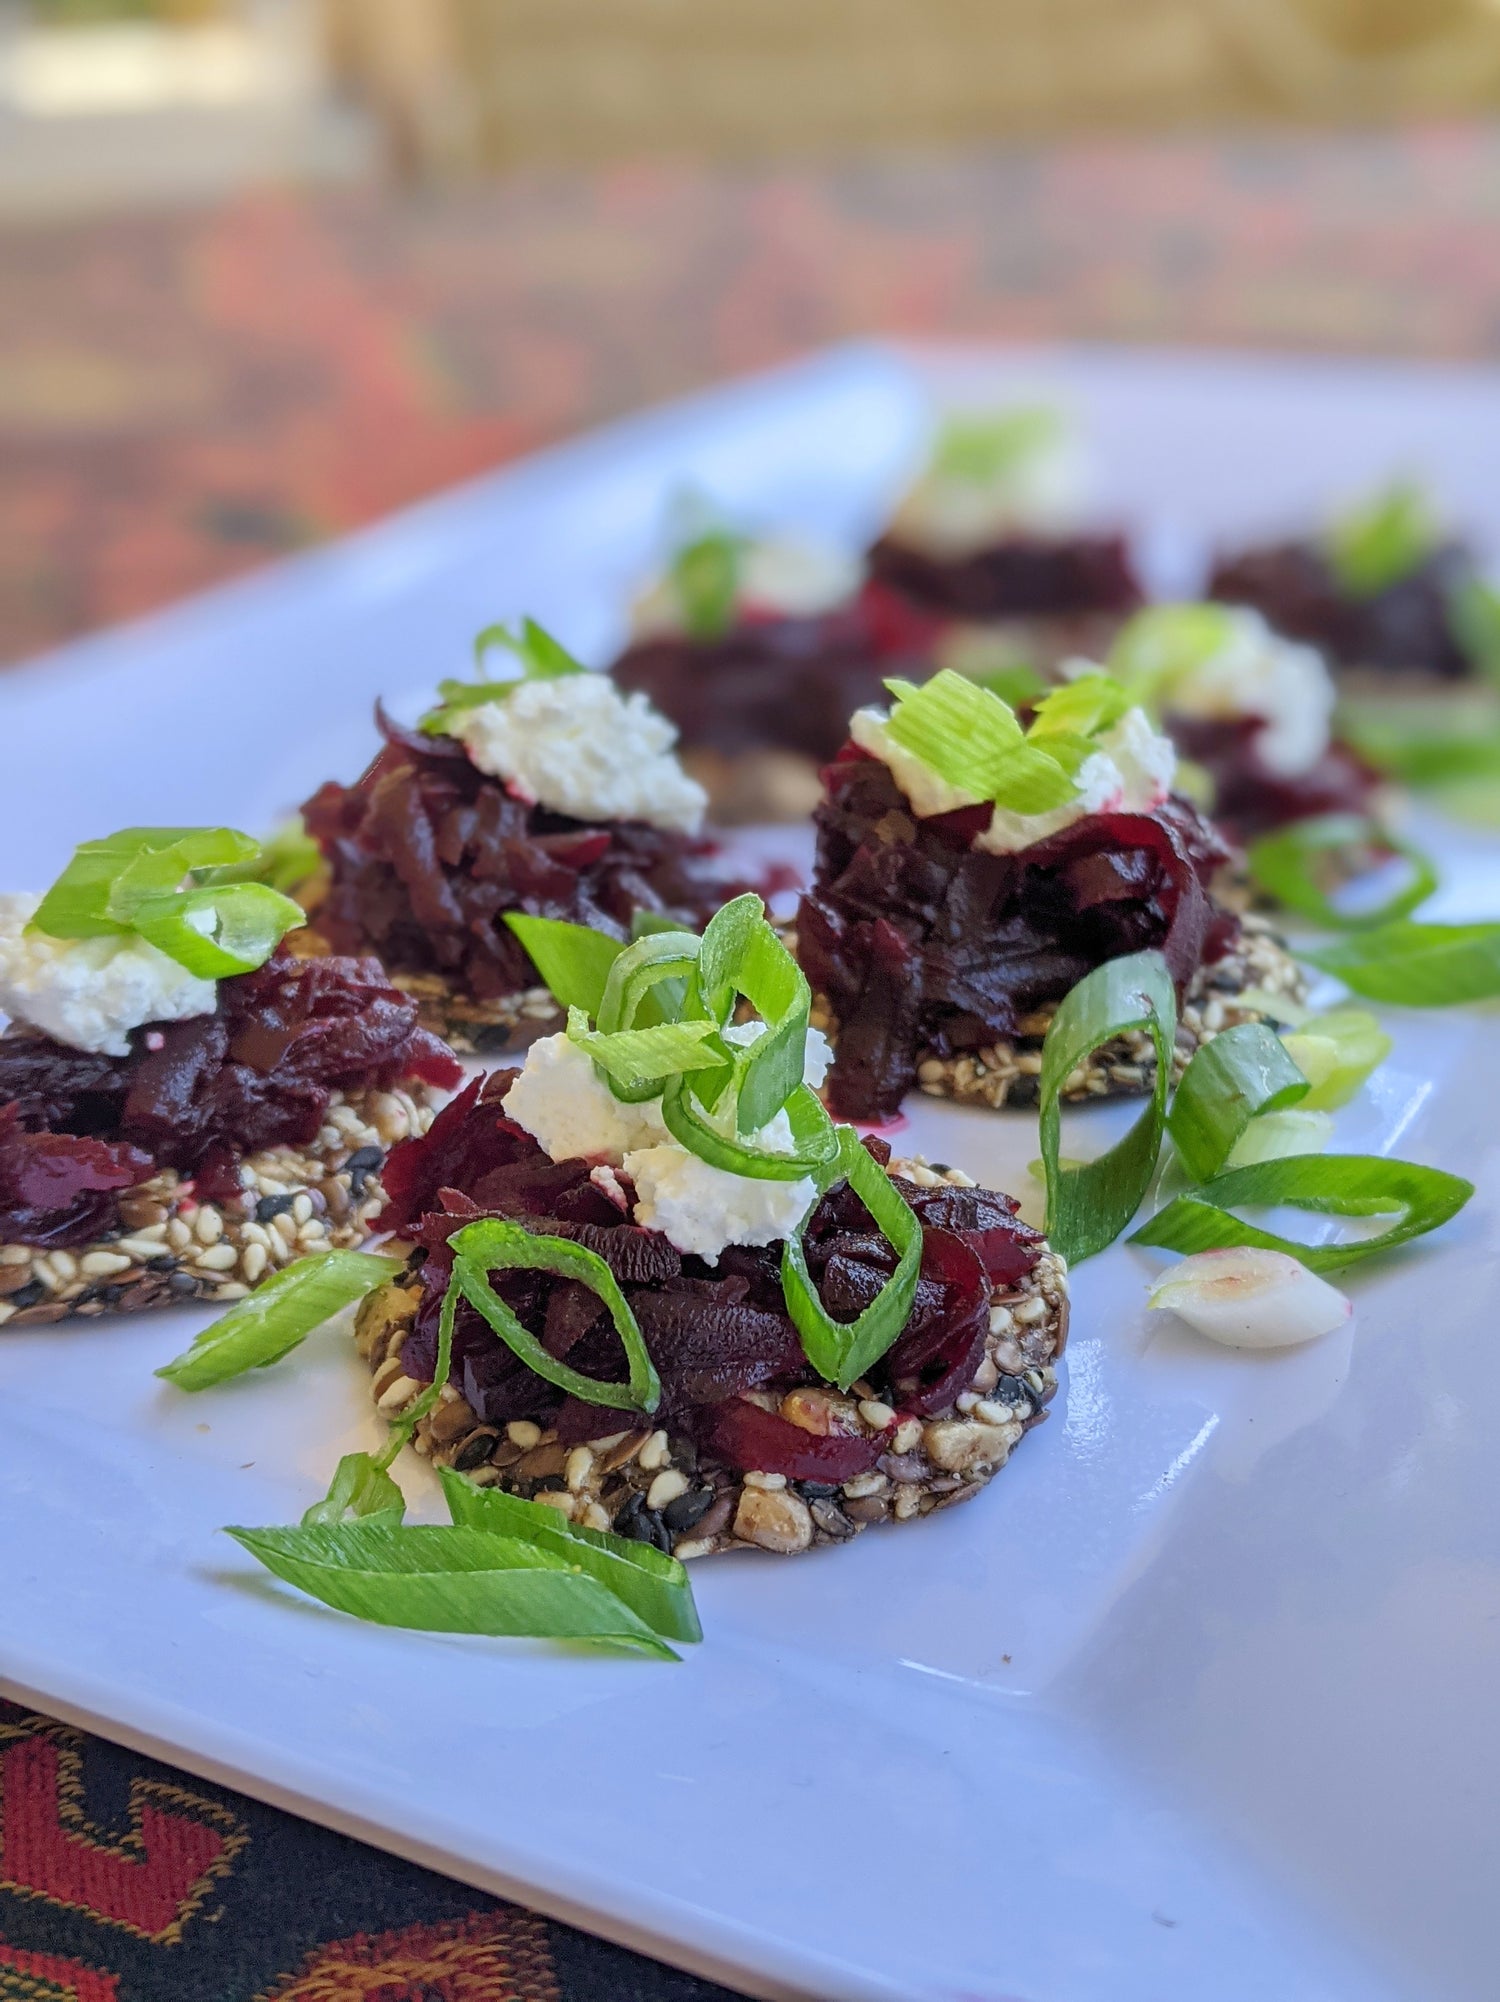 Organic Beetroot & Goat's Cheese Hors d'oeuvres